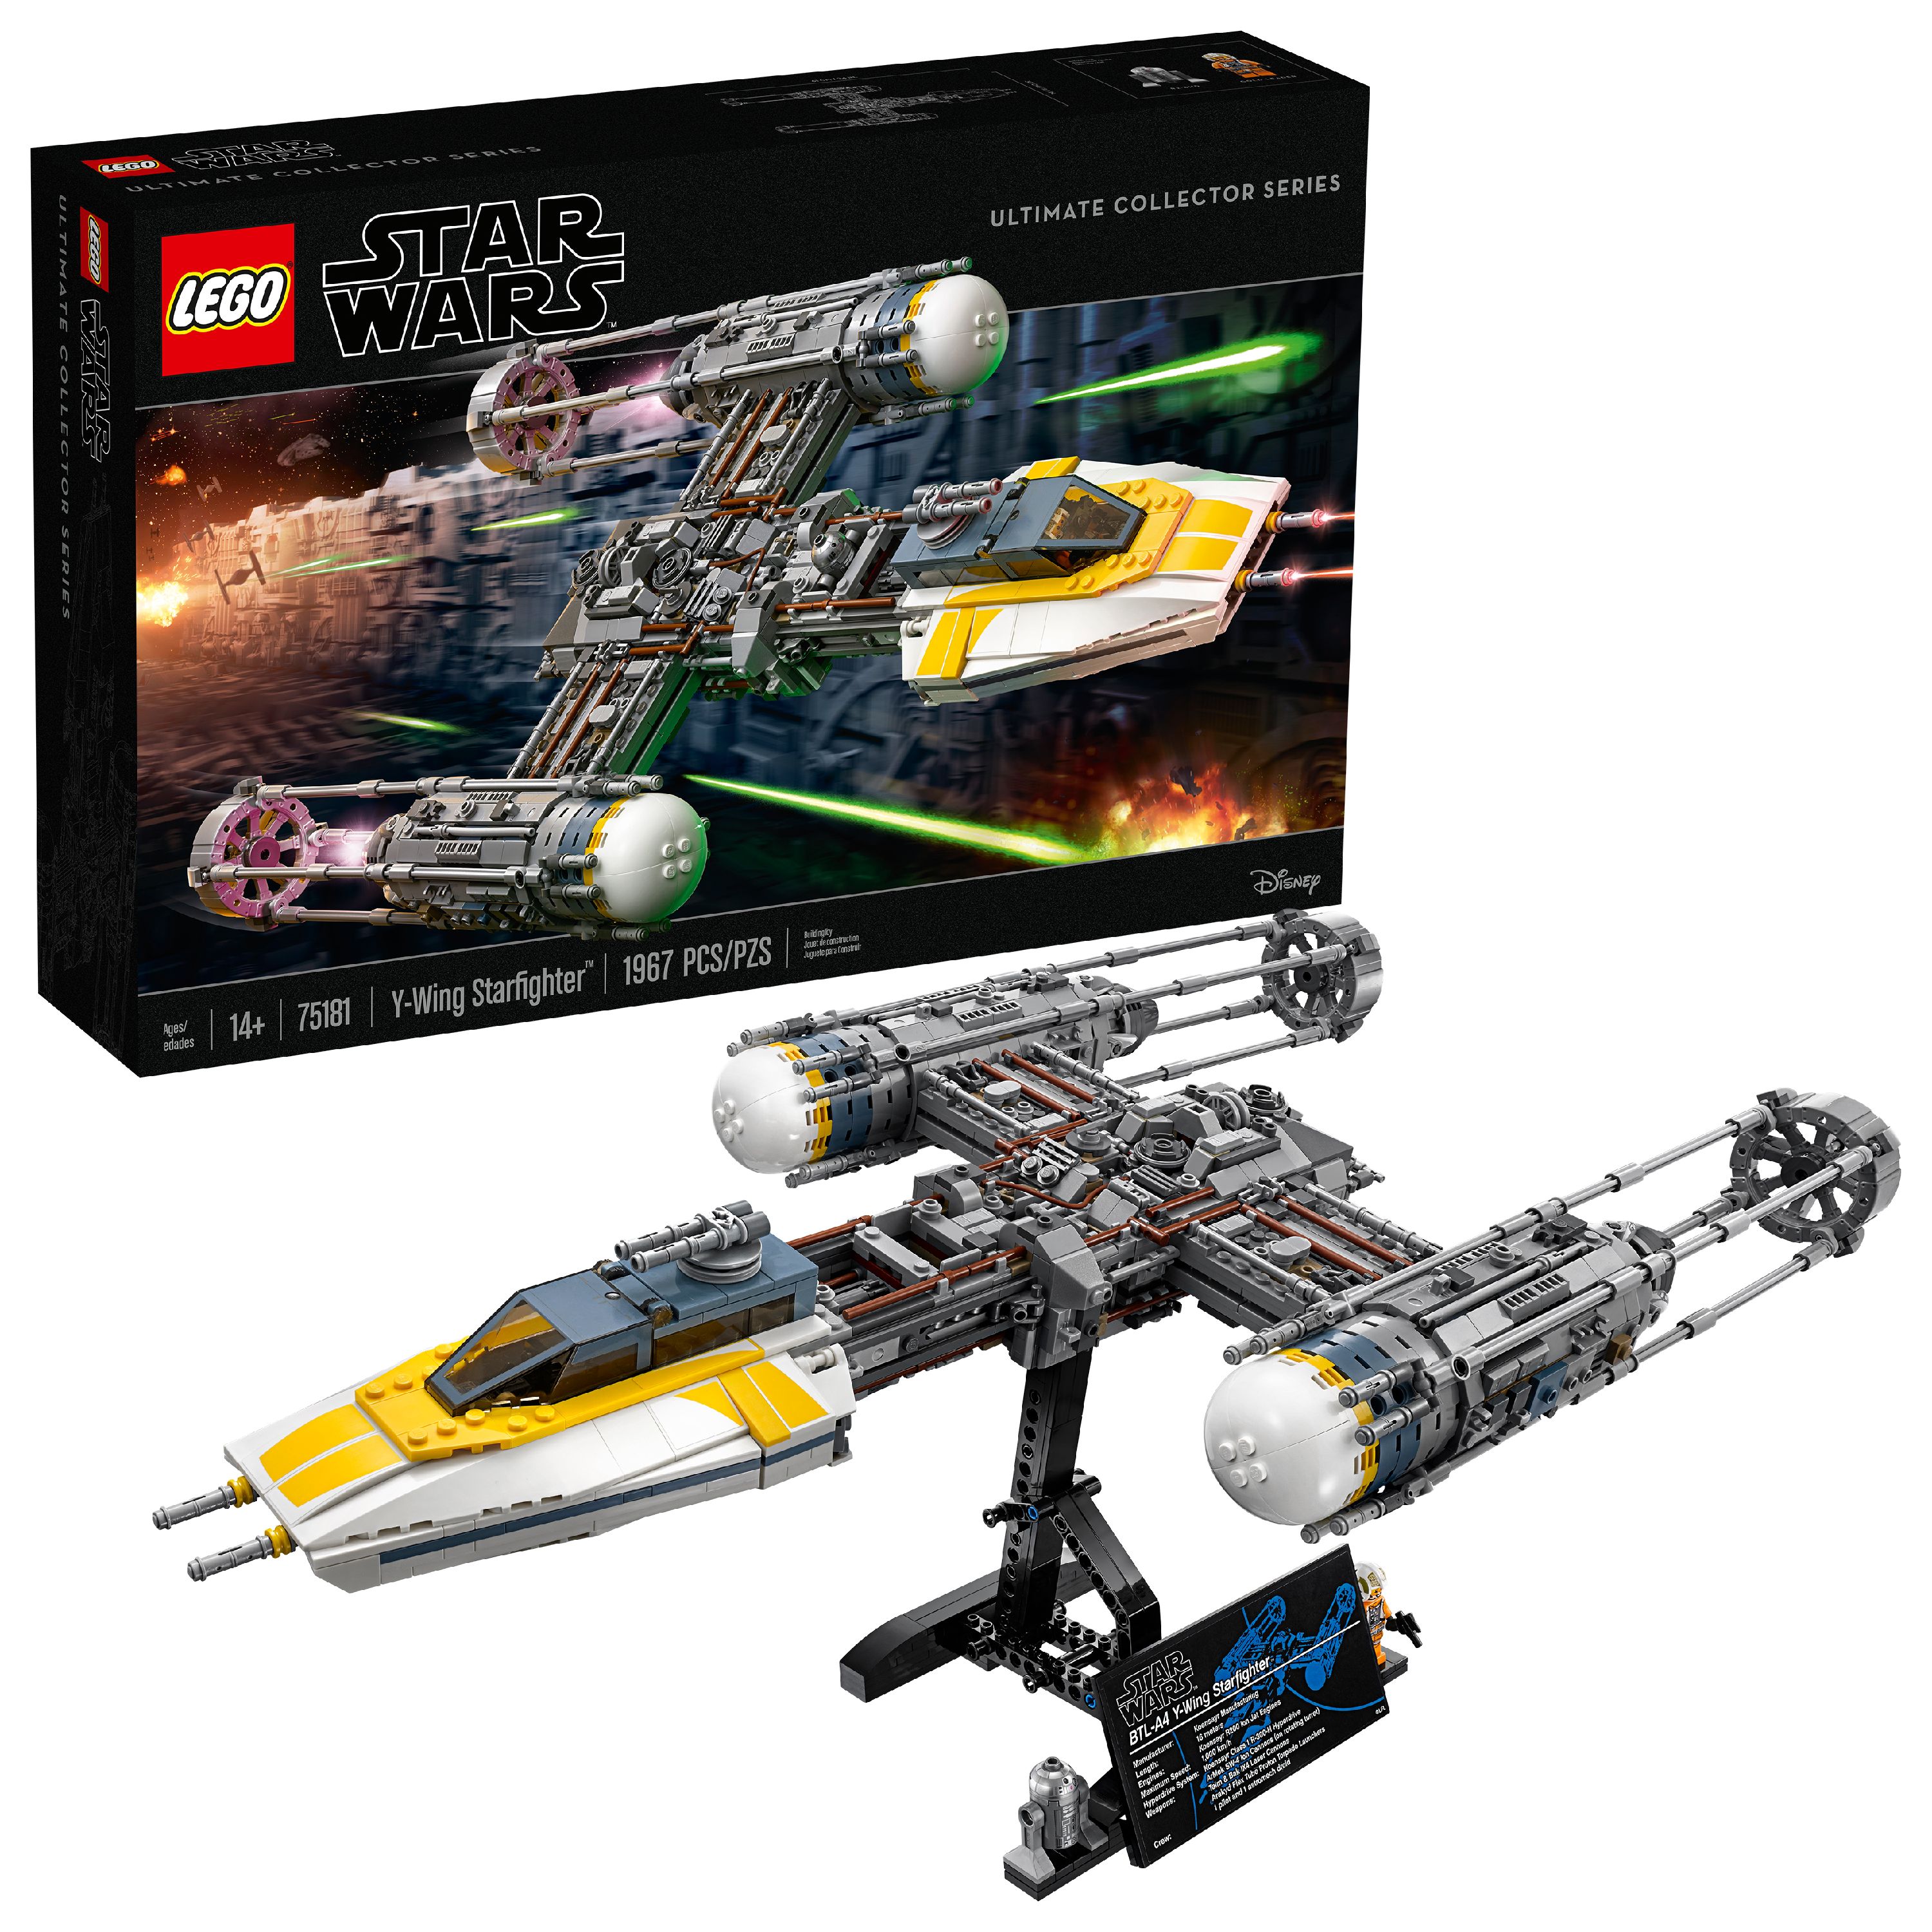 LEGO Star WarsY-Wing Starfighter 75181 Star Wars Ultimate Collector Toy - image 1 of 6